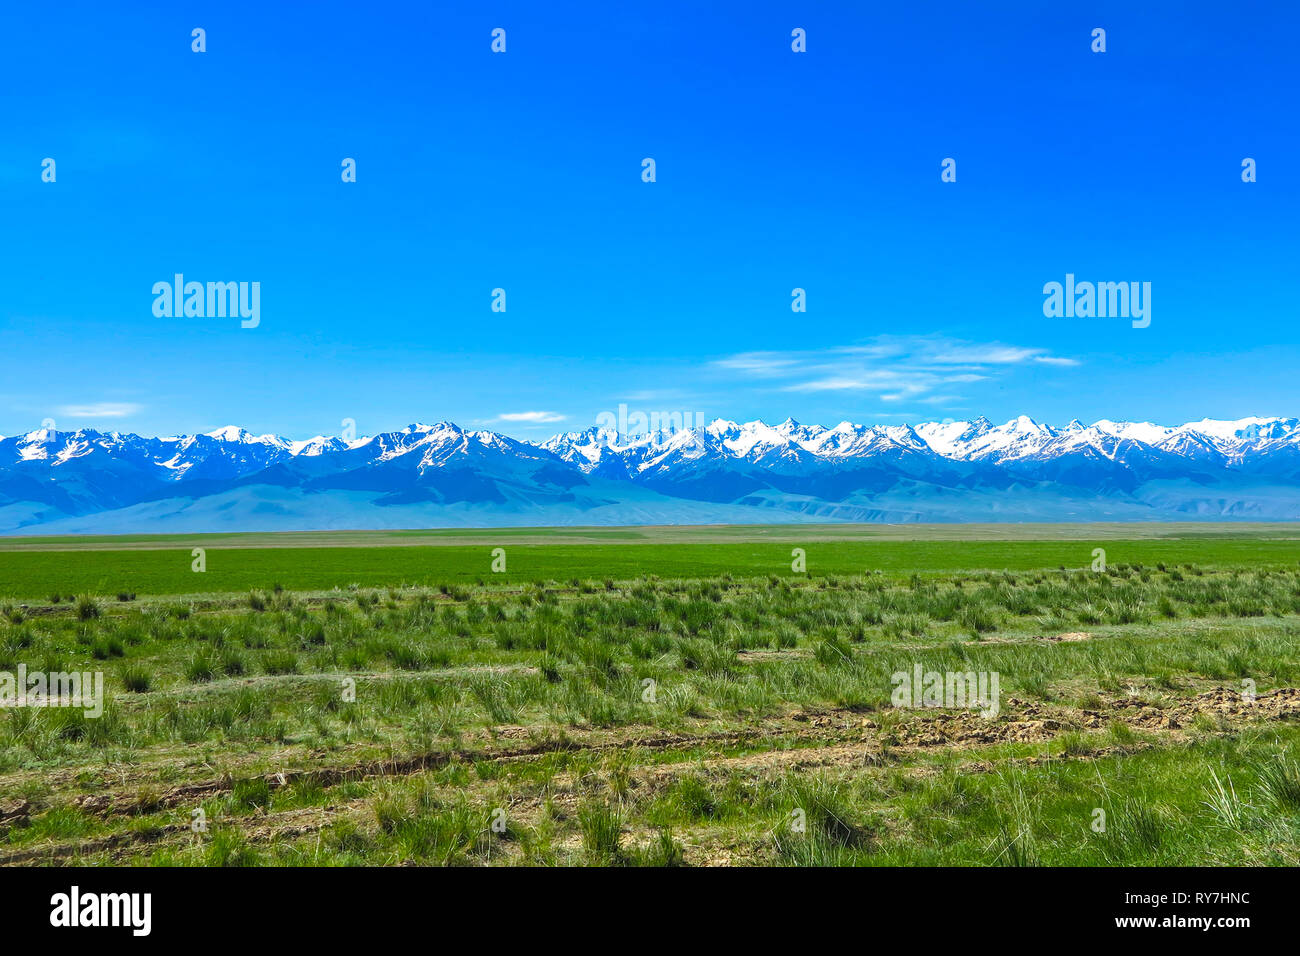 At Bashy Too Snow Capped Mountain Range Peaks and Grass Land Valley Landscape Stock Photo